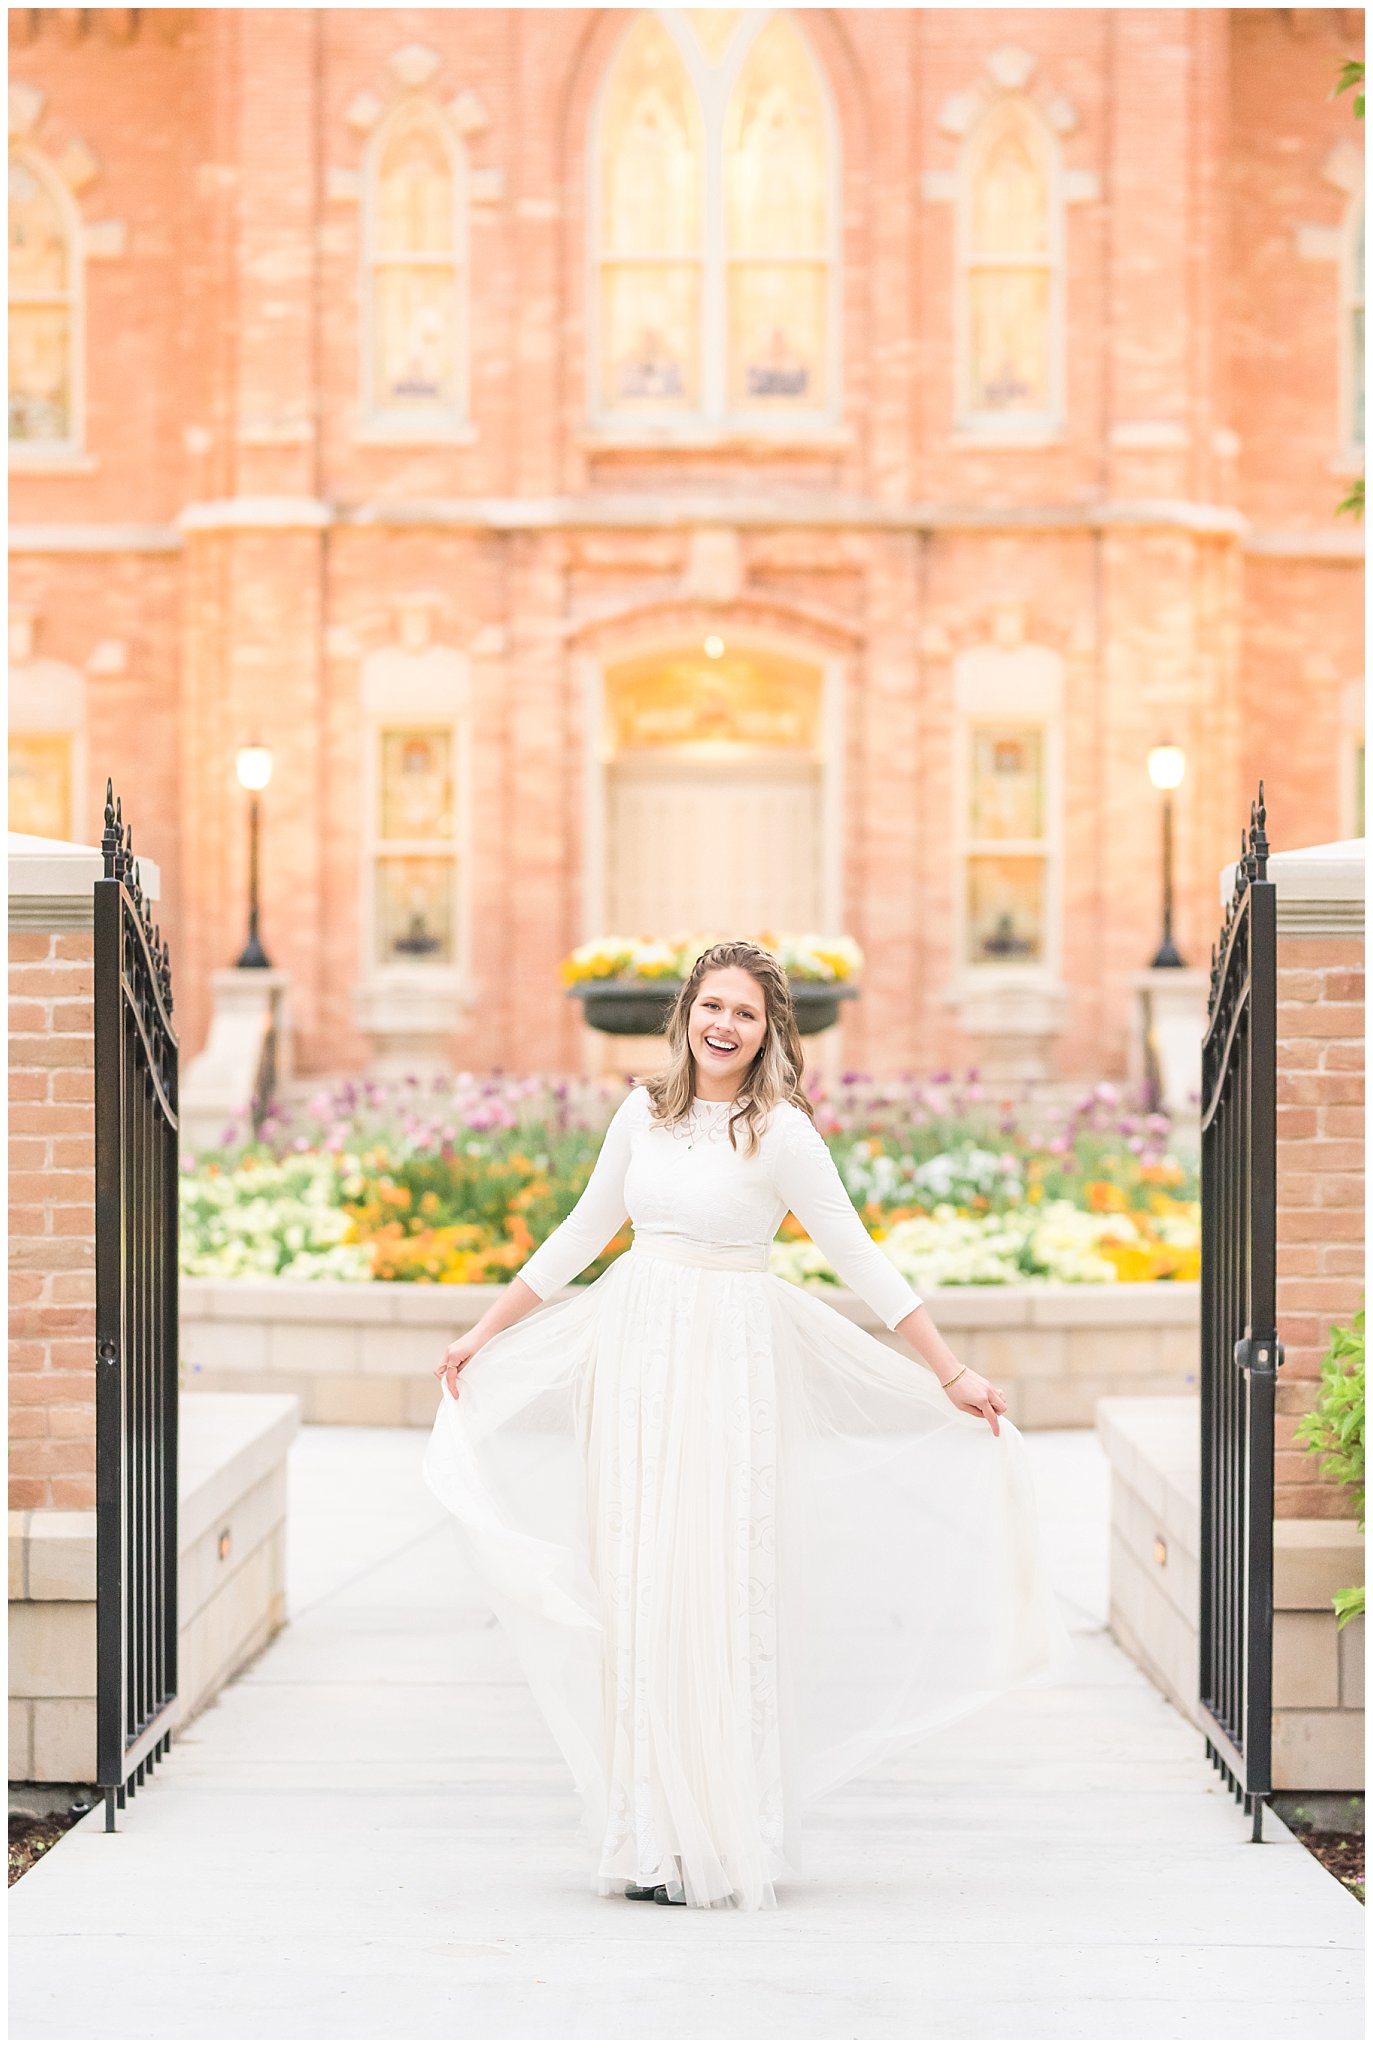 Bride wearing flowy dress for vintage inspired wedding attire | Emerald green, gold wedding colors | Provo City Center Temple Spring Formal Session | Jessie and Dallin Photography